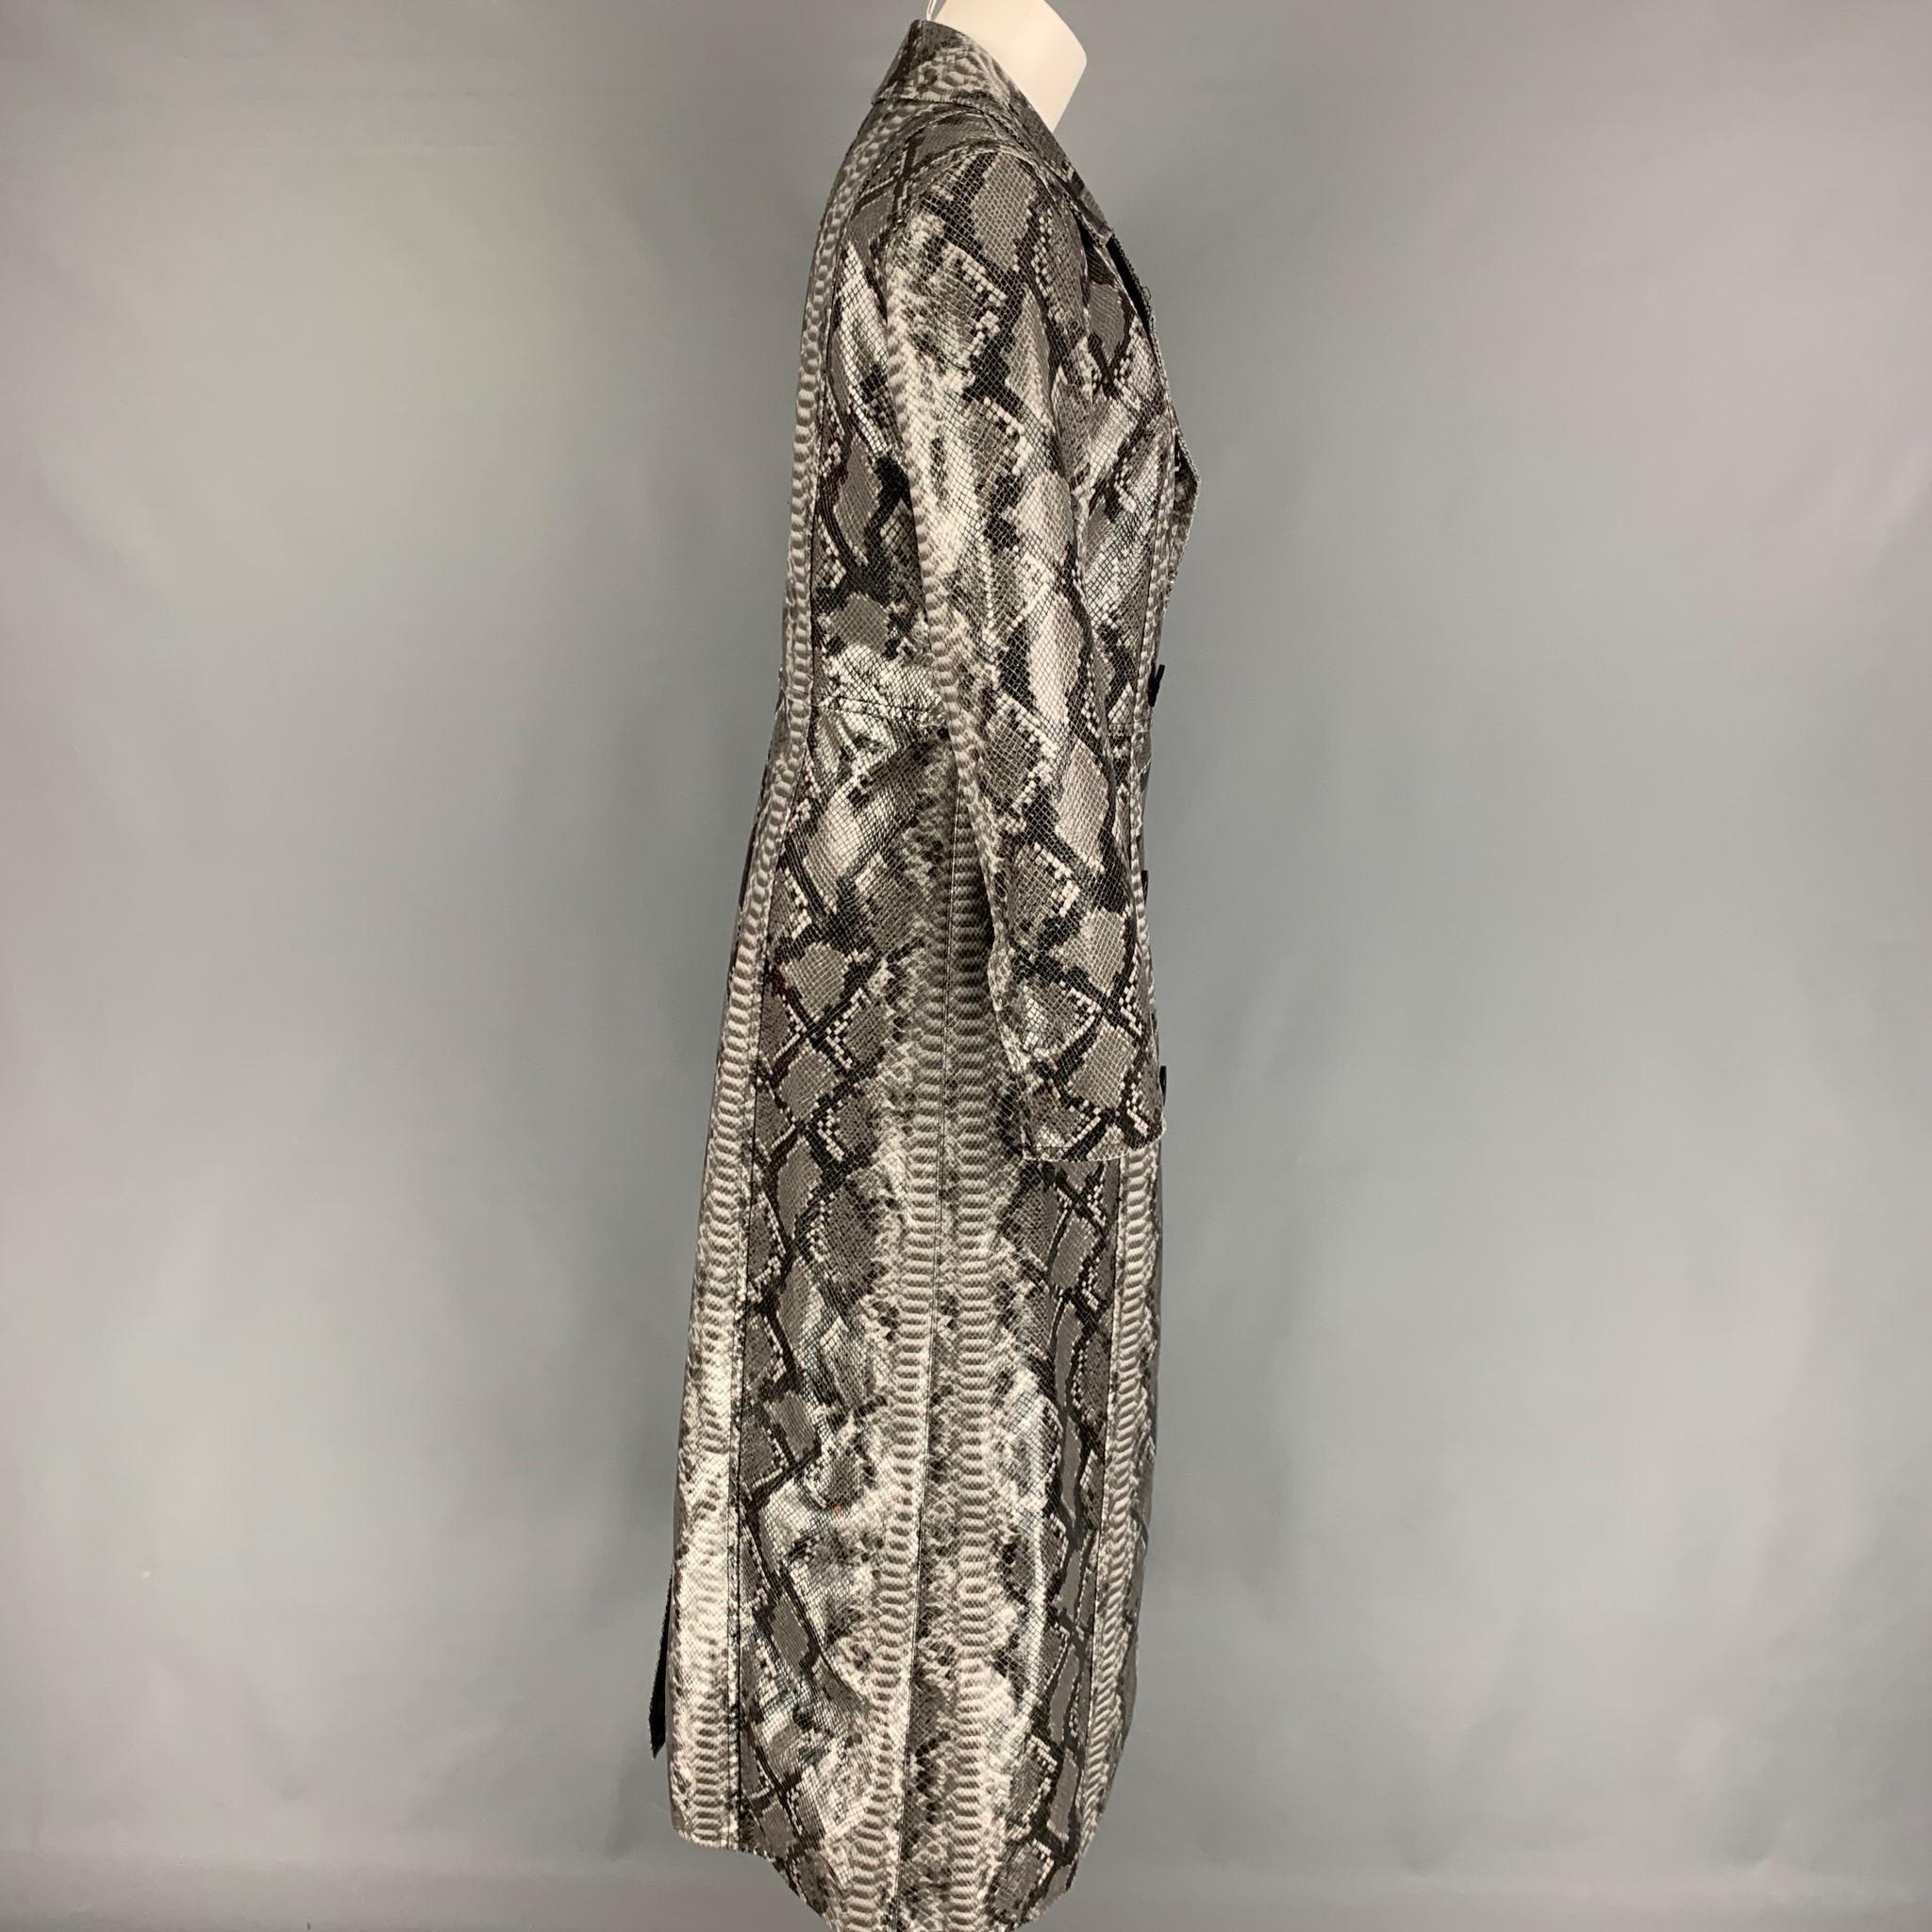 STAND STUDIO coat comes in a grey & black snake skin print polyester blend featuring a notch lapel, slit pockets, and a double breasted closure. 

Very Good Pre-Owned Condition.
Marked: 38

Measurements:

Shoulder: 15.5 in.
Bust: 35 in.
Sleeve: 24